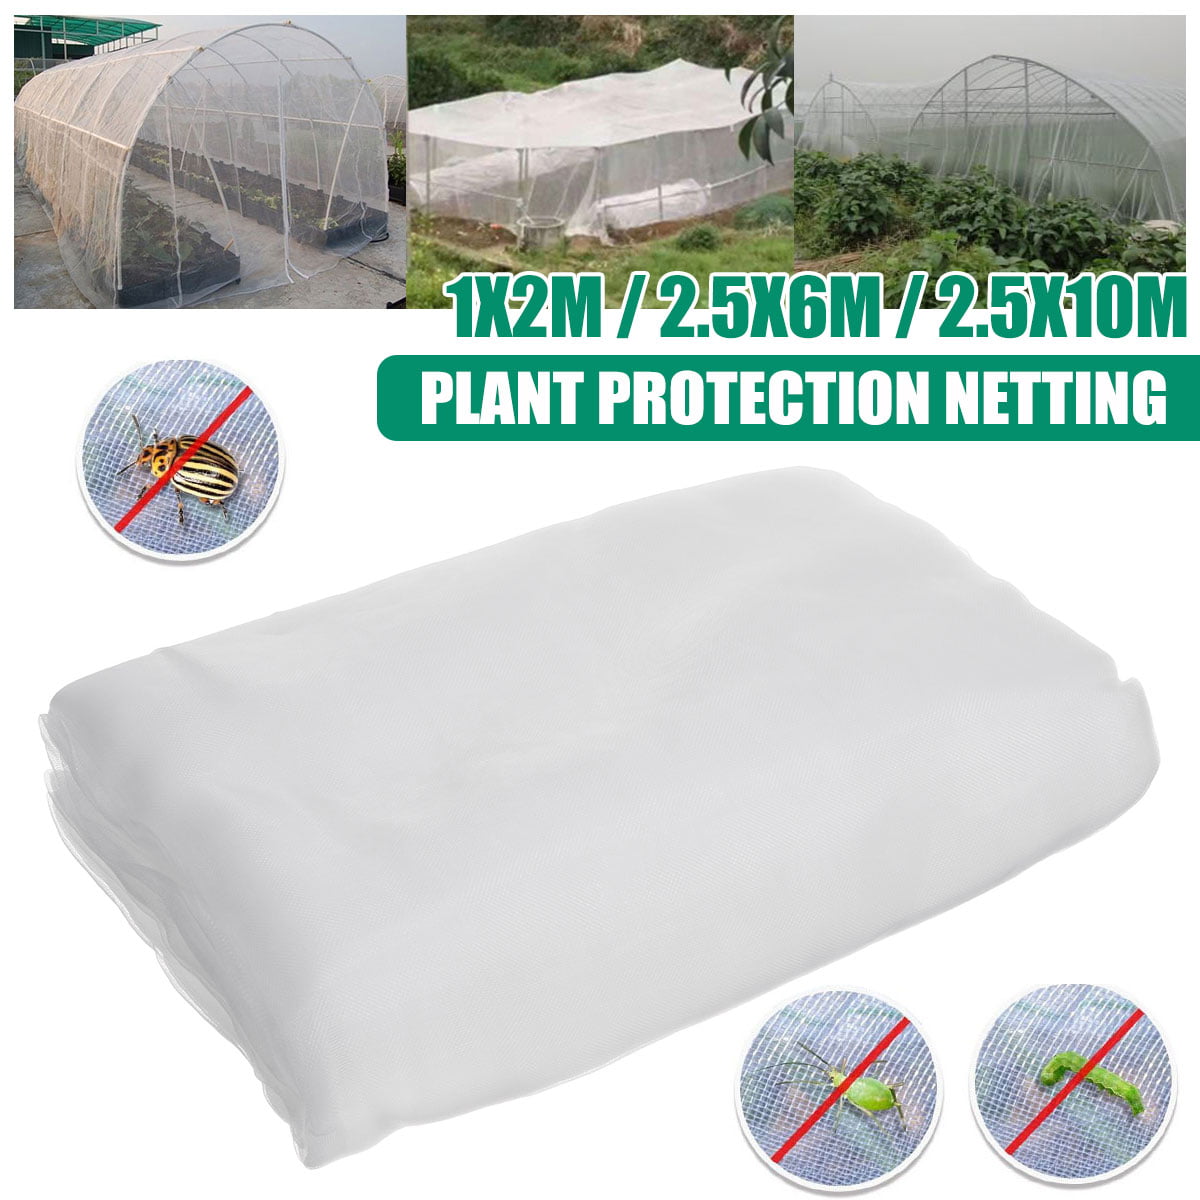 Garden Netting,8x33Ft Mosquito Insect Birds Animals Barrier Protection Net Ultra Fine Garden Mesh Netting Plant Covers for Vegetable Plants Fruits Flowers Trees Greenhouse Row Cover 